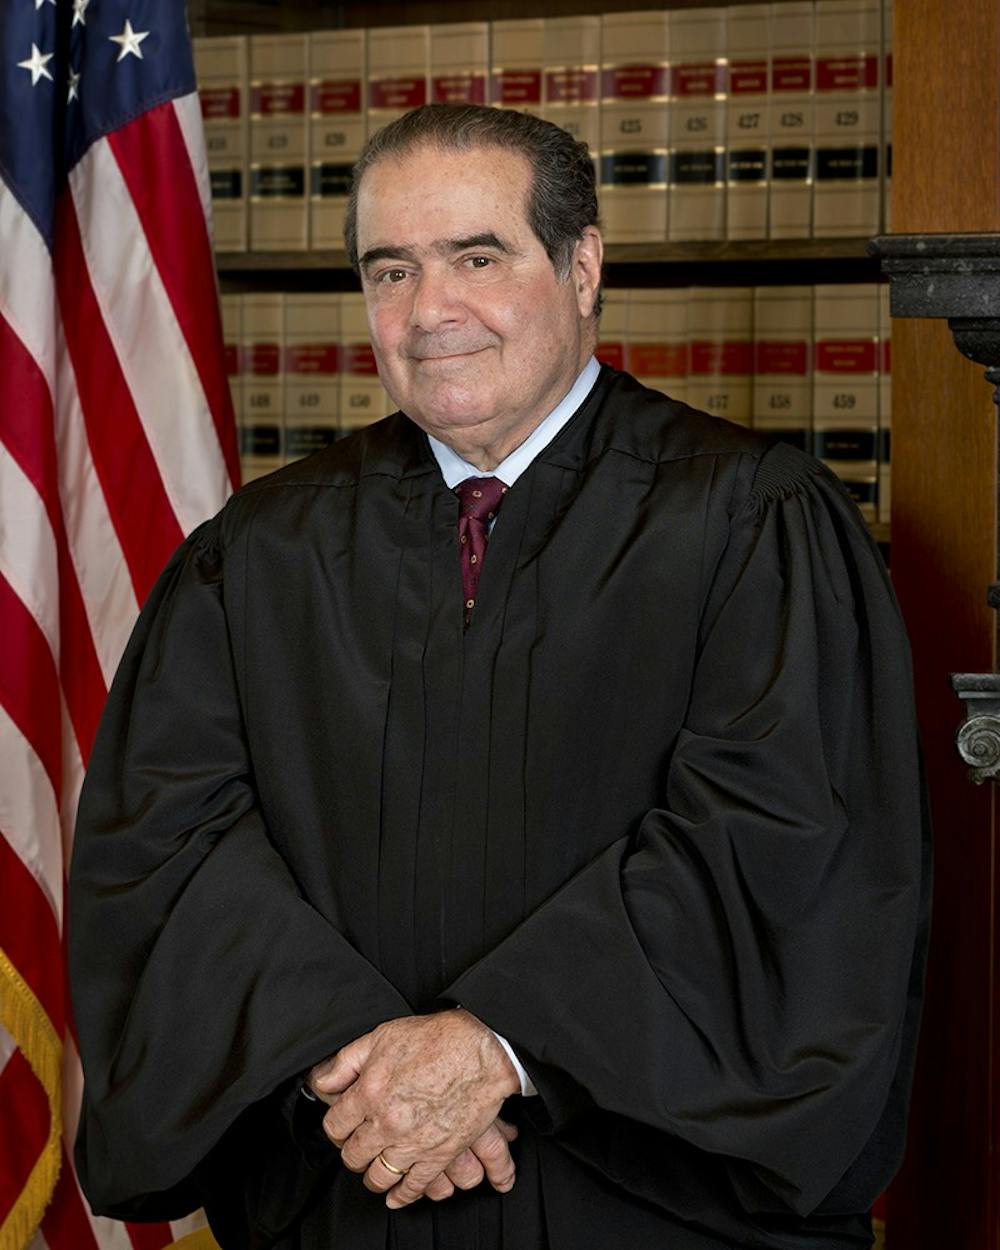 <p>Justice Antonin Scalia, who served on the Supreme Court for nearly three decades, died Feb. 13.</p>